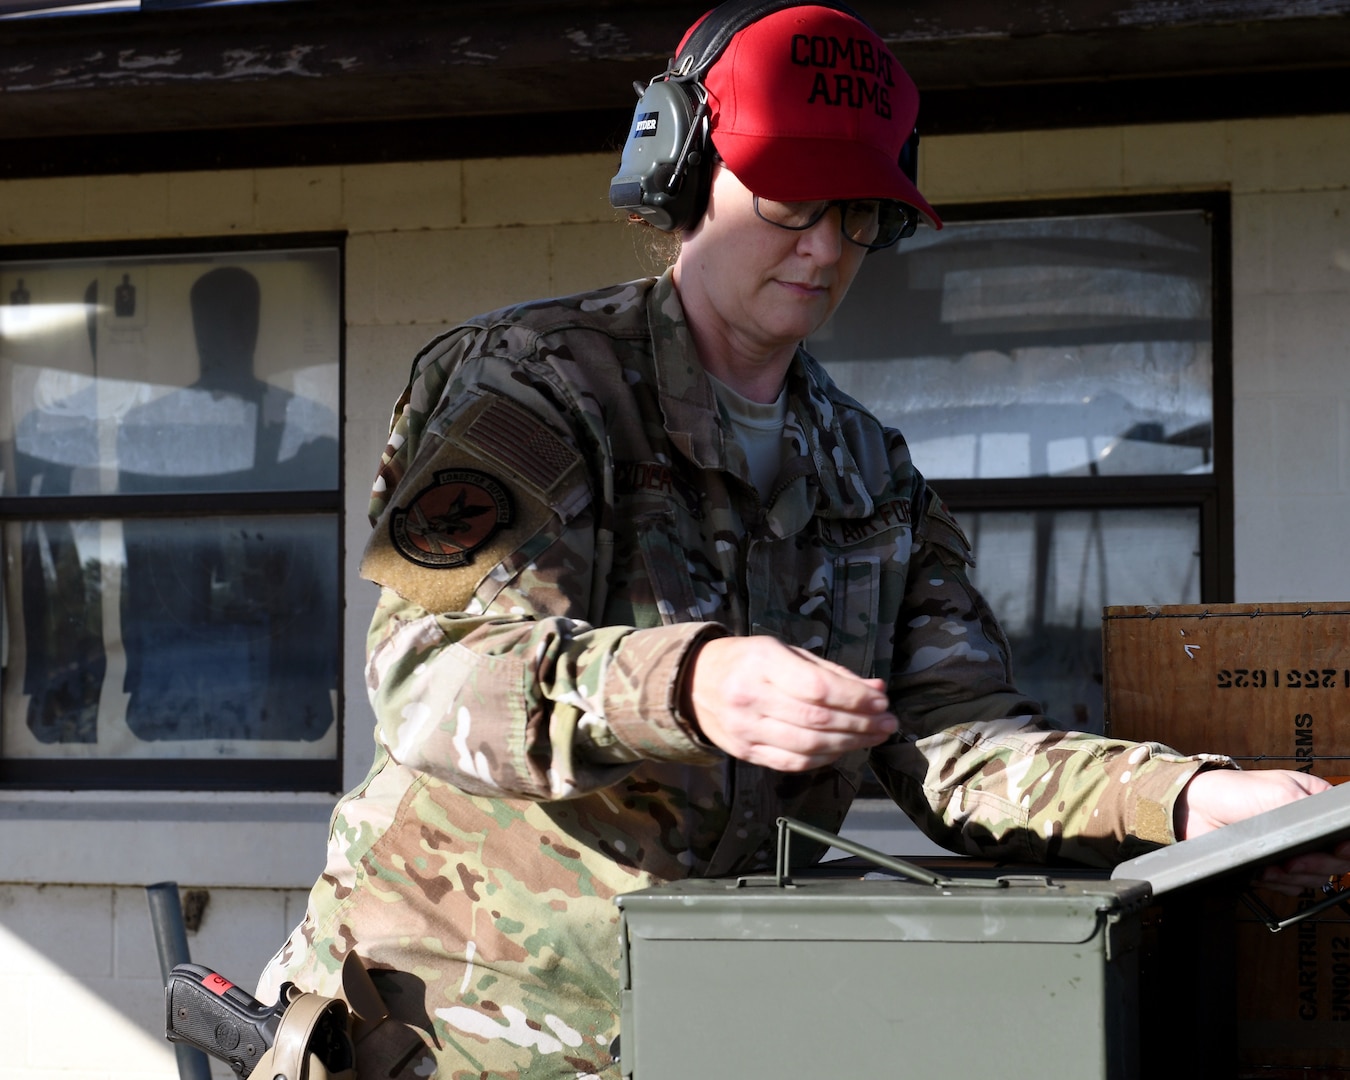 Staff Sgt. Tina Ryder, an Air National Guard Combat Arms instructor from the 149th Security Forces Squadron, prepares for weapons qualification training at a firing range on Joint Base San Antonio’s Medina Annex May 27, 2020.